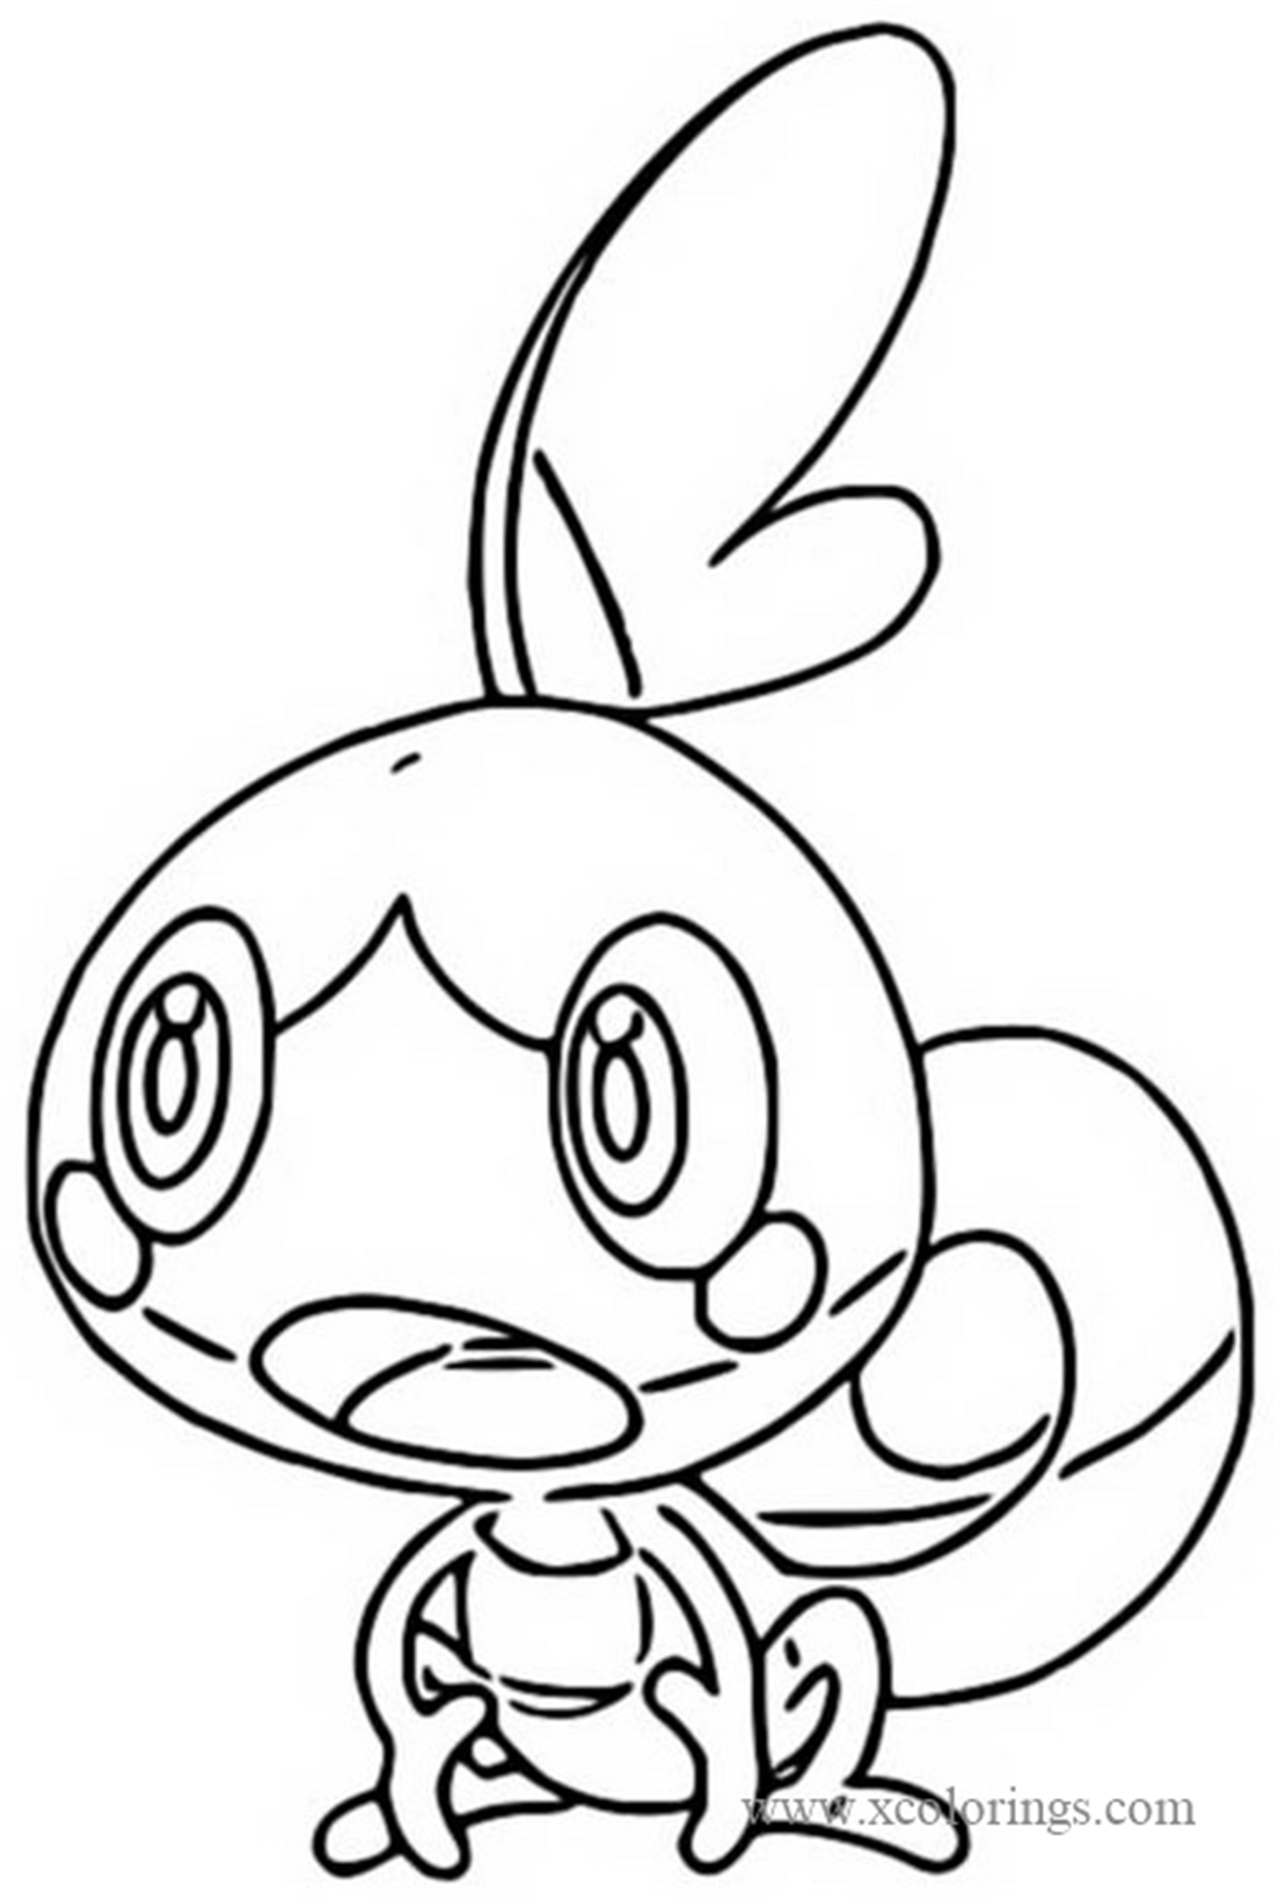 Free Sobble from Pokemon Sword and Shield Coloring Pages printable